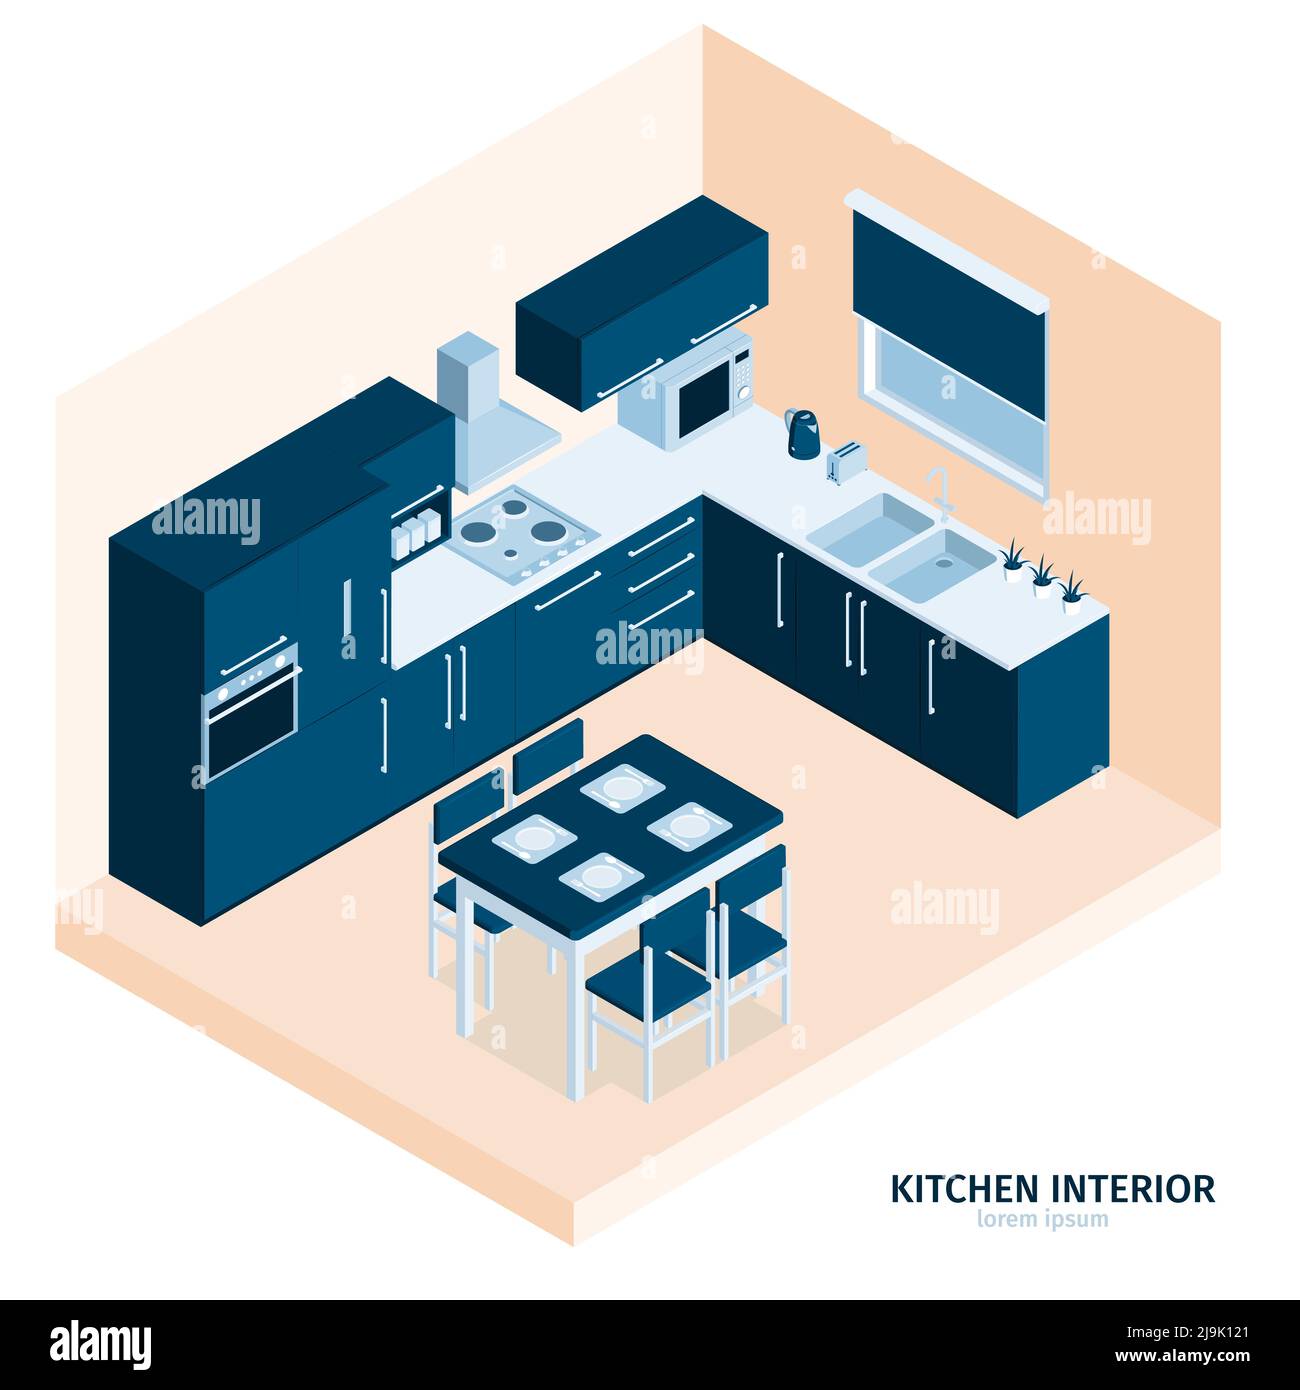 Isometric kitchen composition with text and indoor view of dining place with stove kitchenware and cabinetry vector illustration Stock Vector